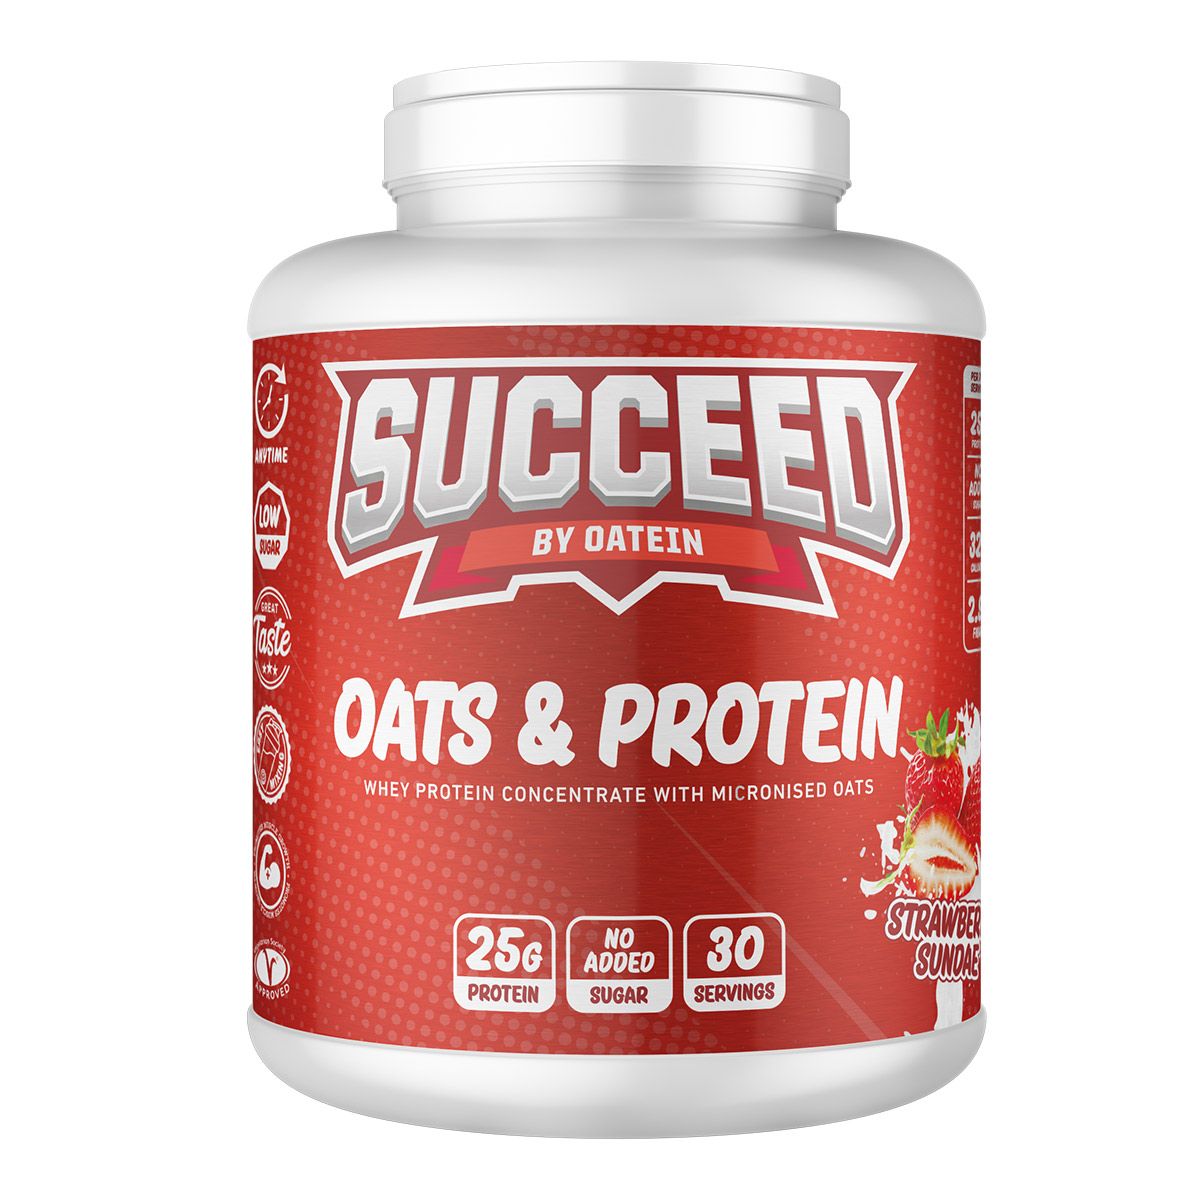 Oatein Succeed Oats & Whey Protein - Strawberry Cream 2.2kg